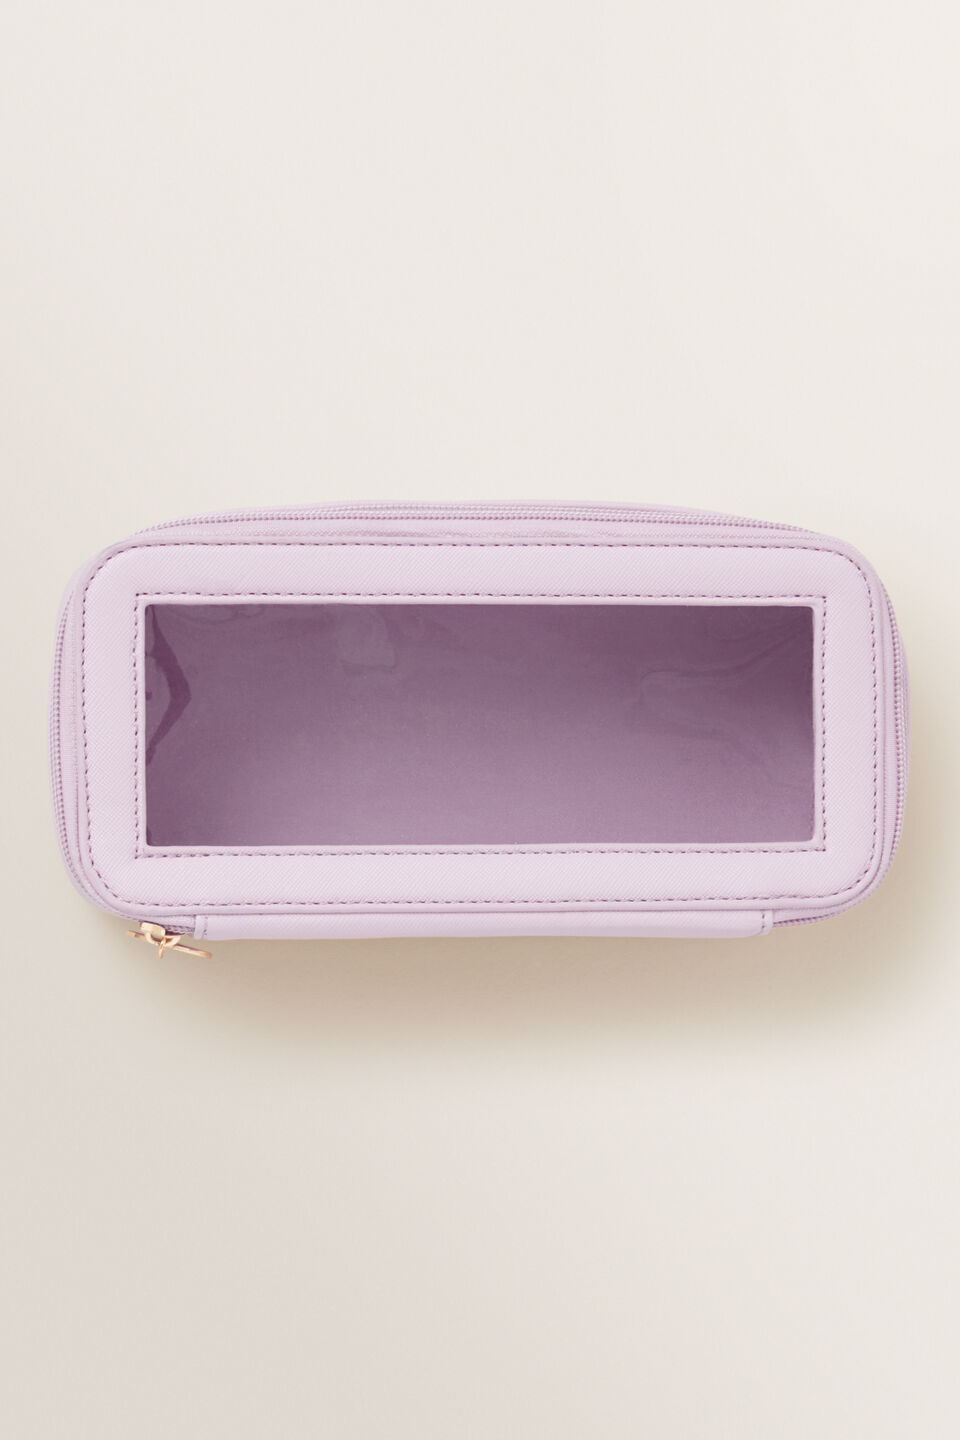 Made By Me Cosmetic Case  Lilac